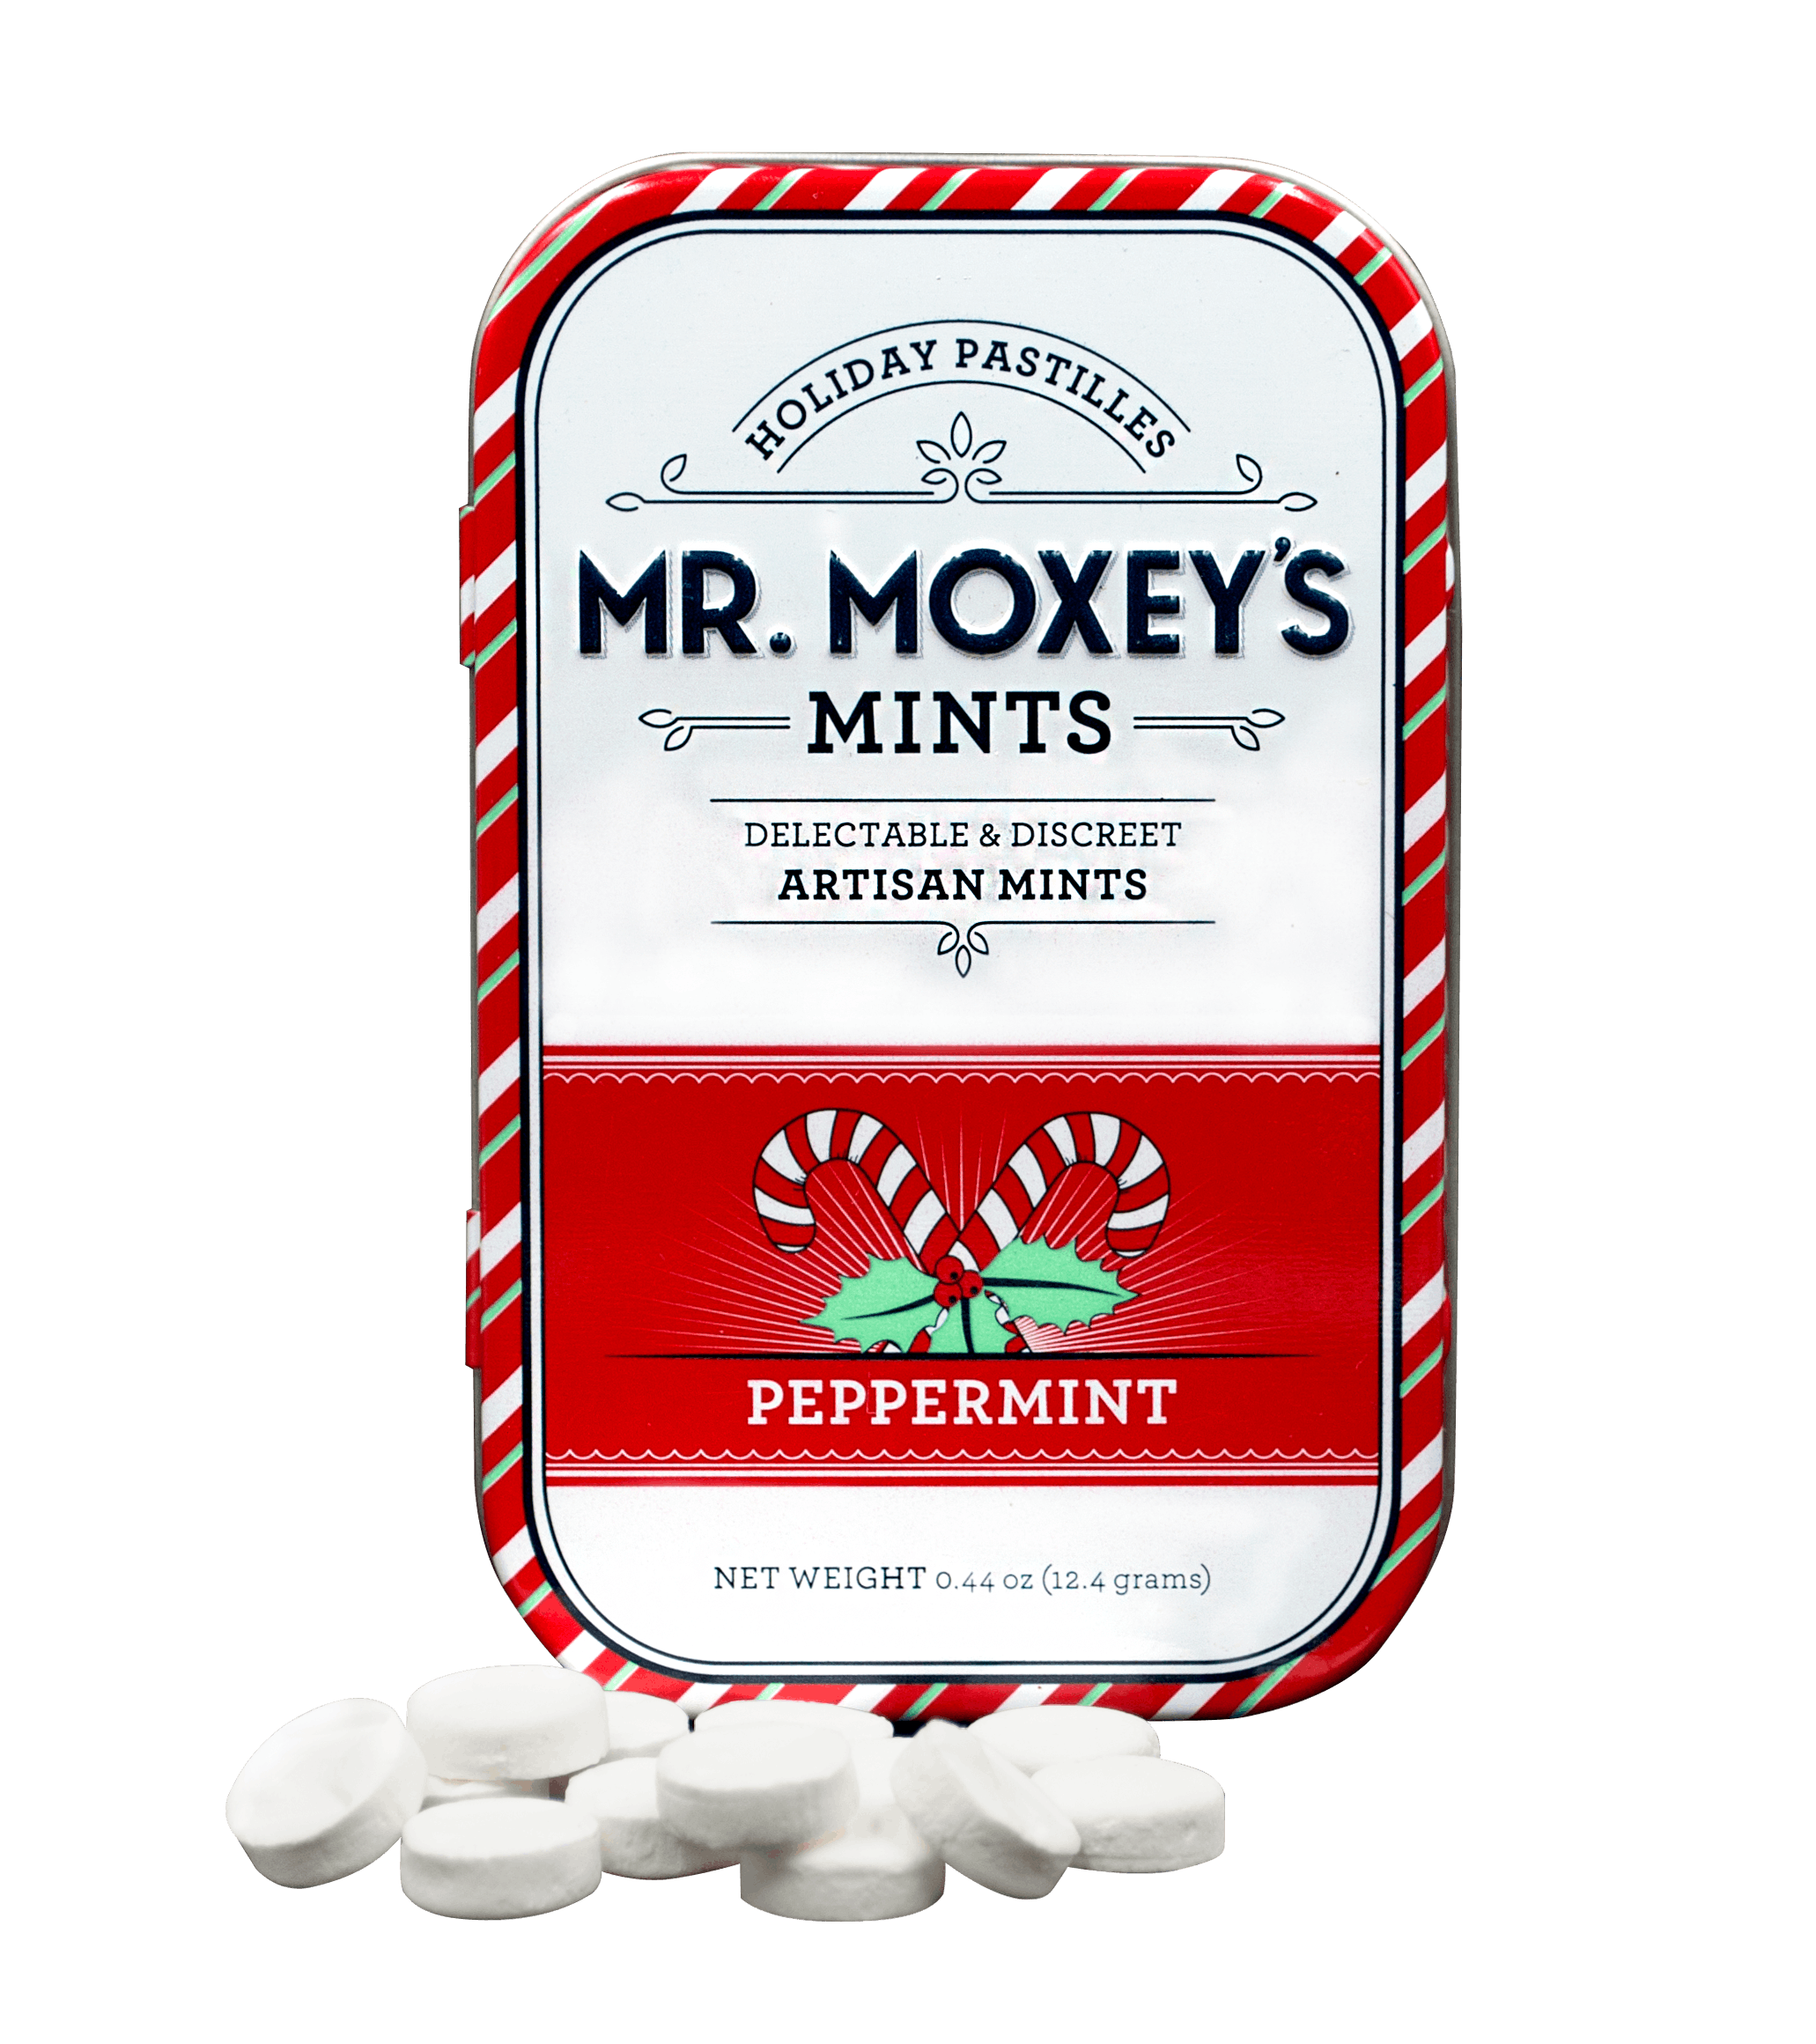 edible-mr-moxeys-21-holiday-perppermint-mints